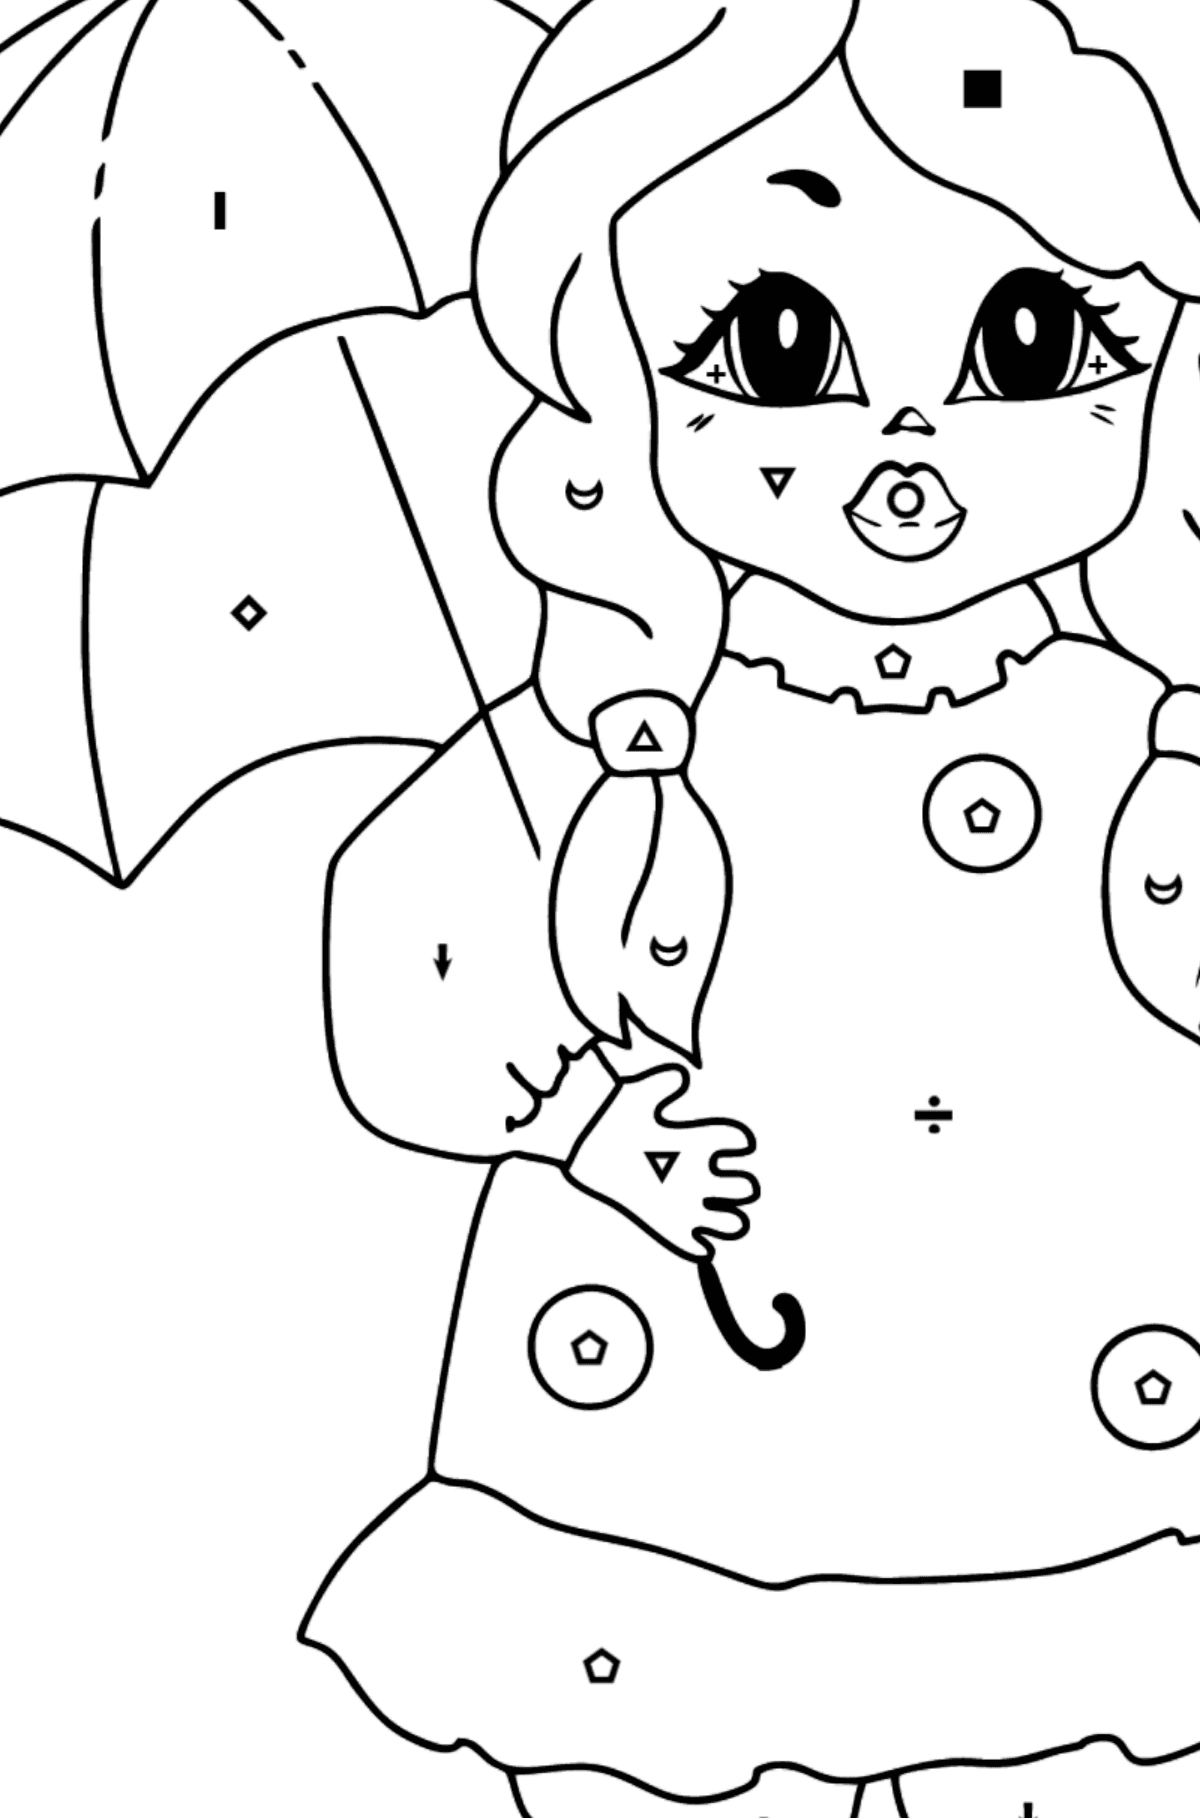 Funny princess coloring page - Coloring by Symbols and Geometric Shapes for Kids